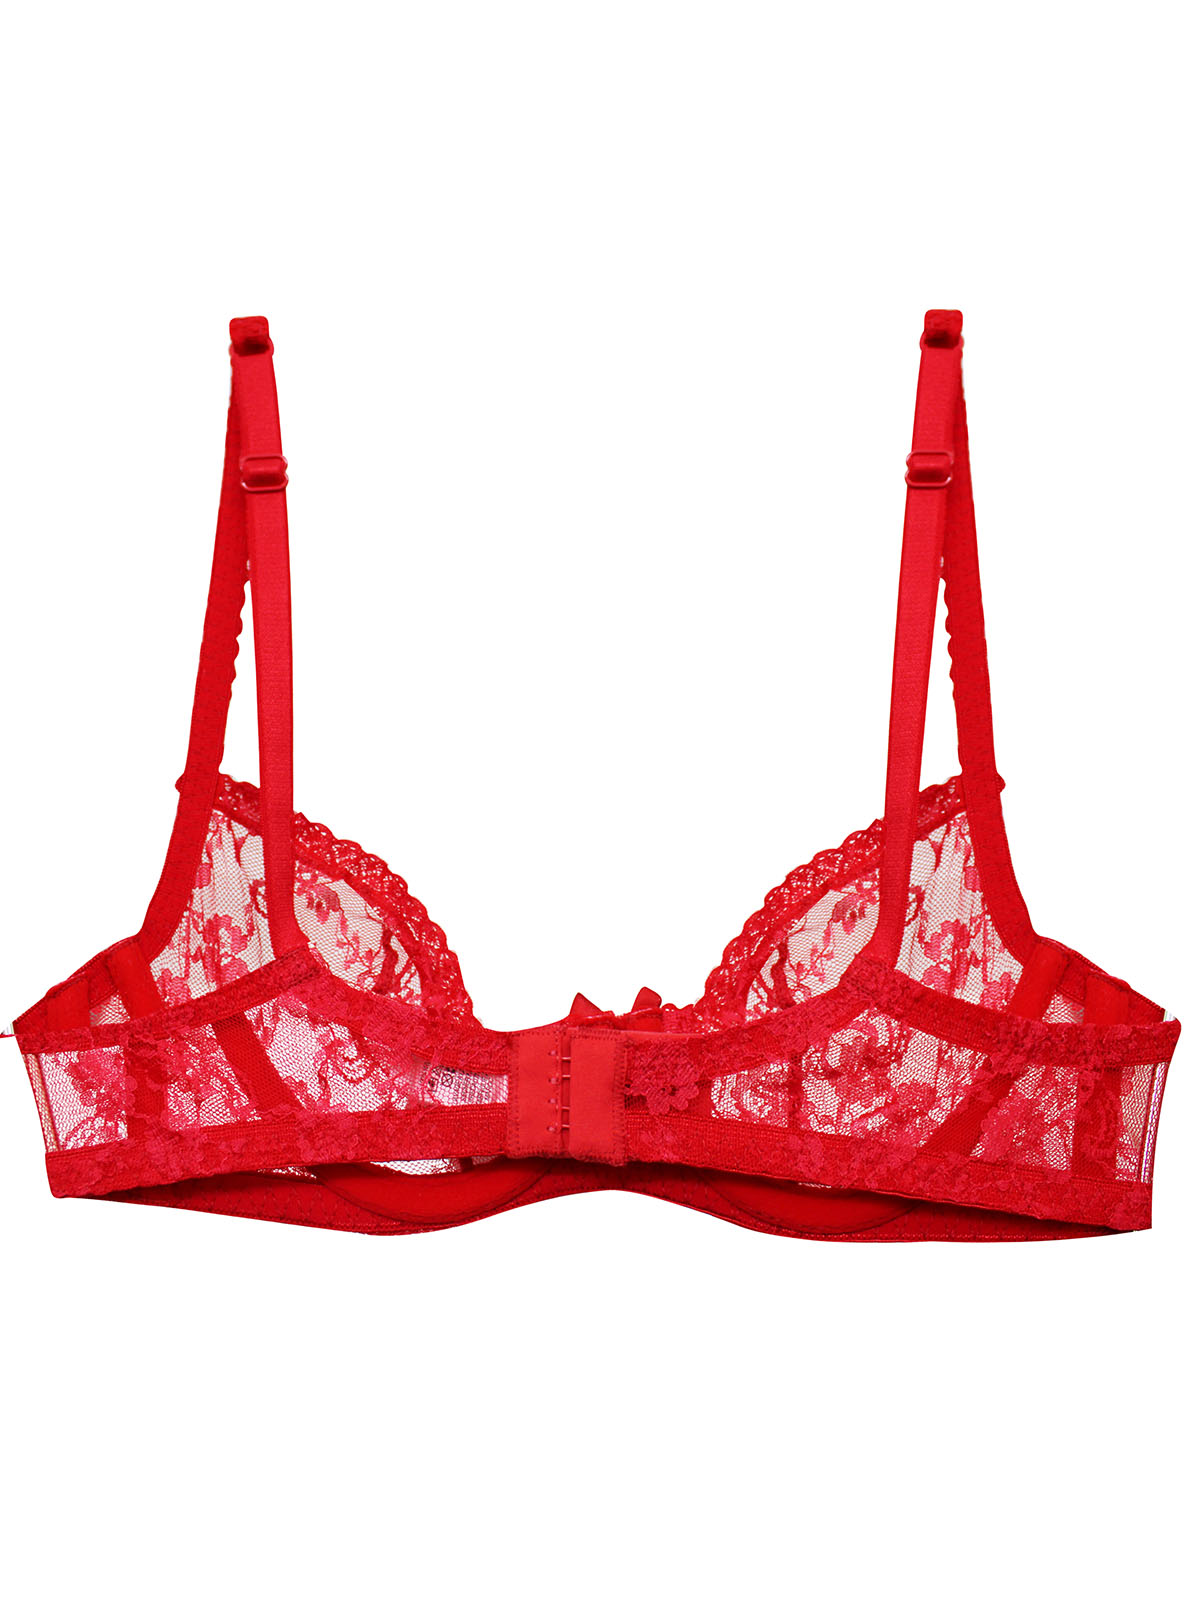 AGENT PROVOCATEUR SEXY SOLD OUT RED SUGAR BRA 34B & 2 SMALL BRIEF